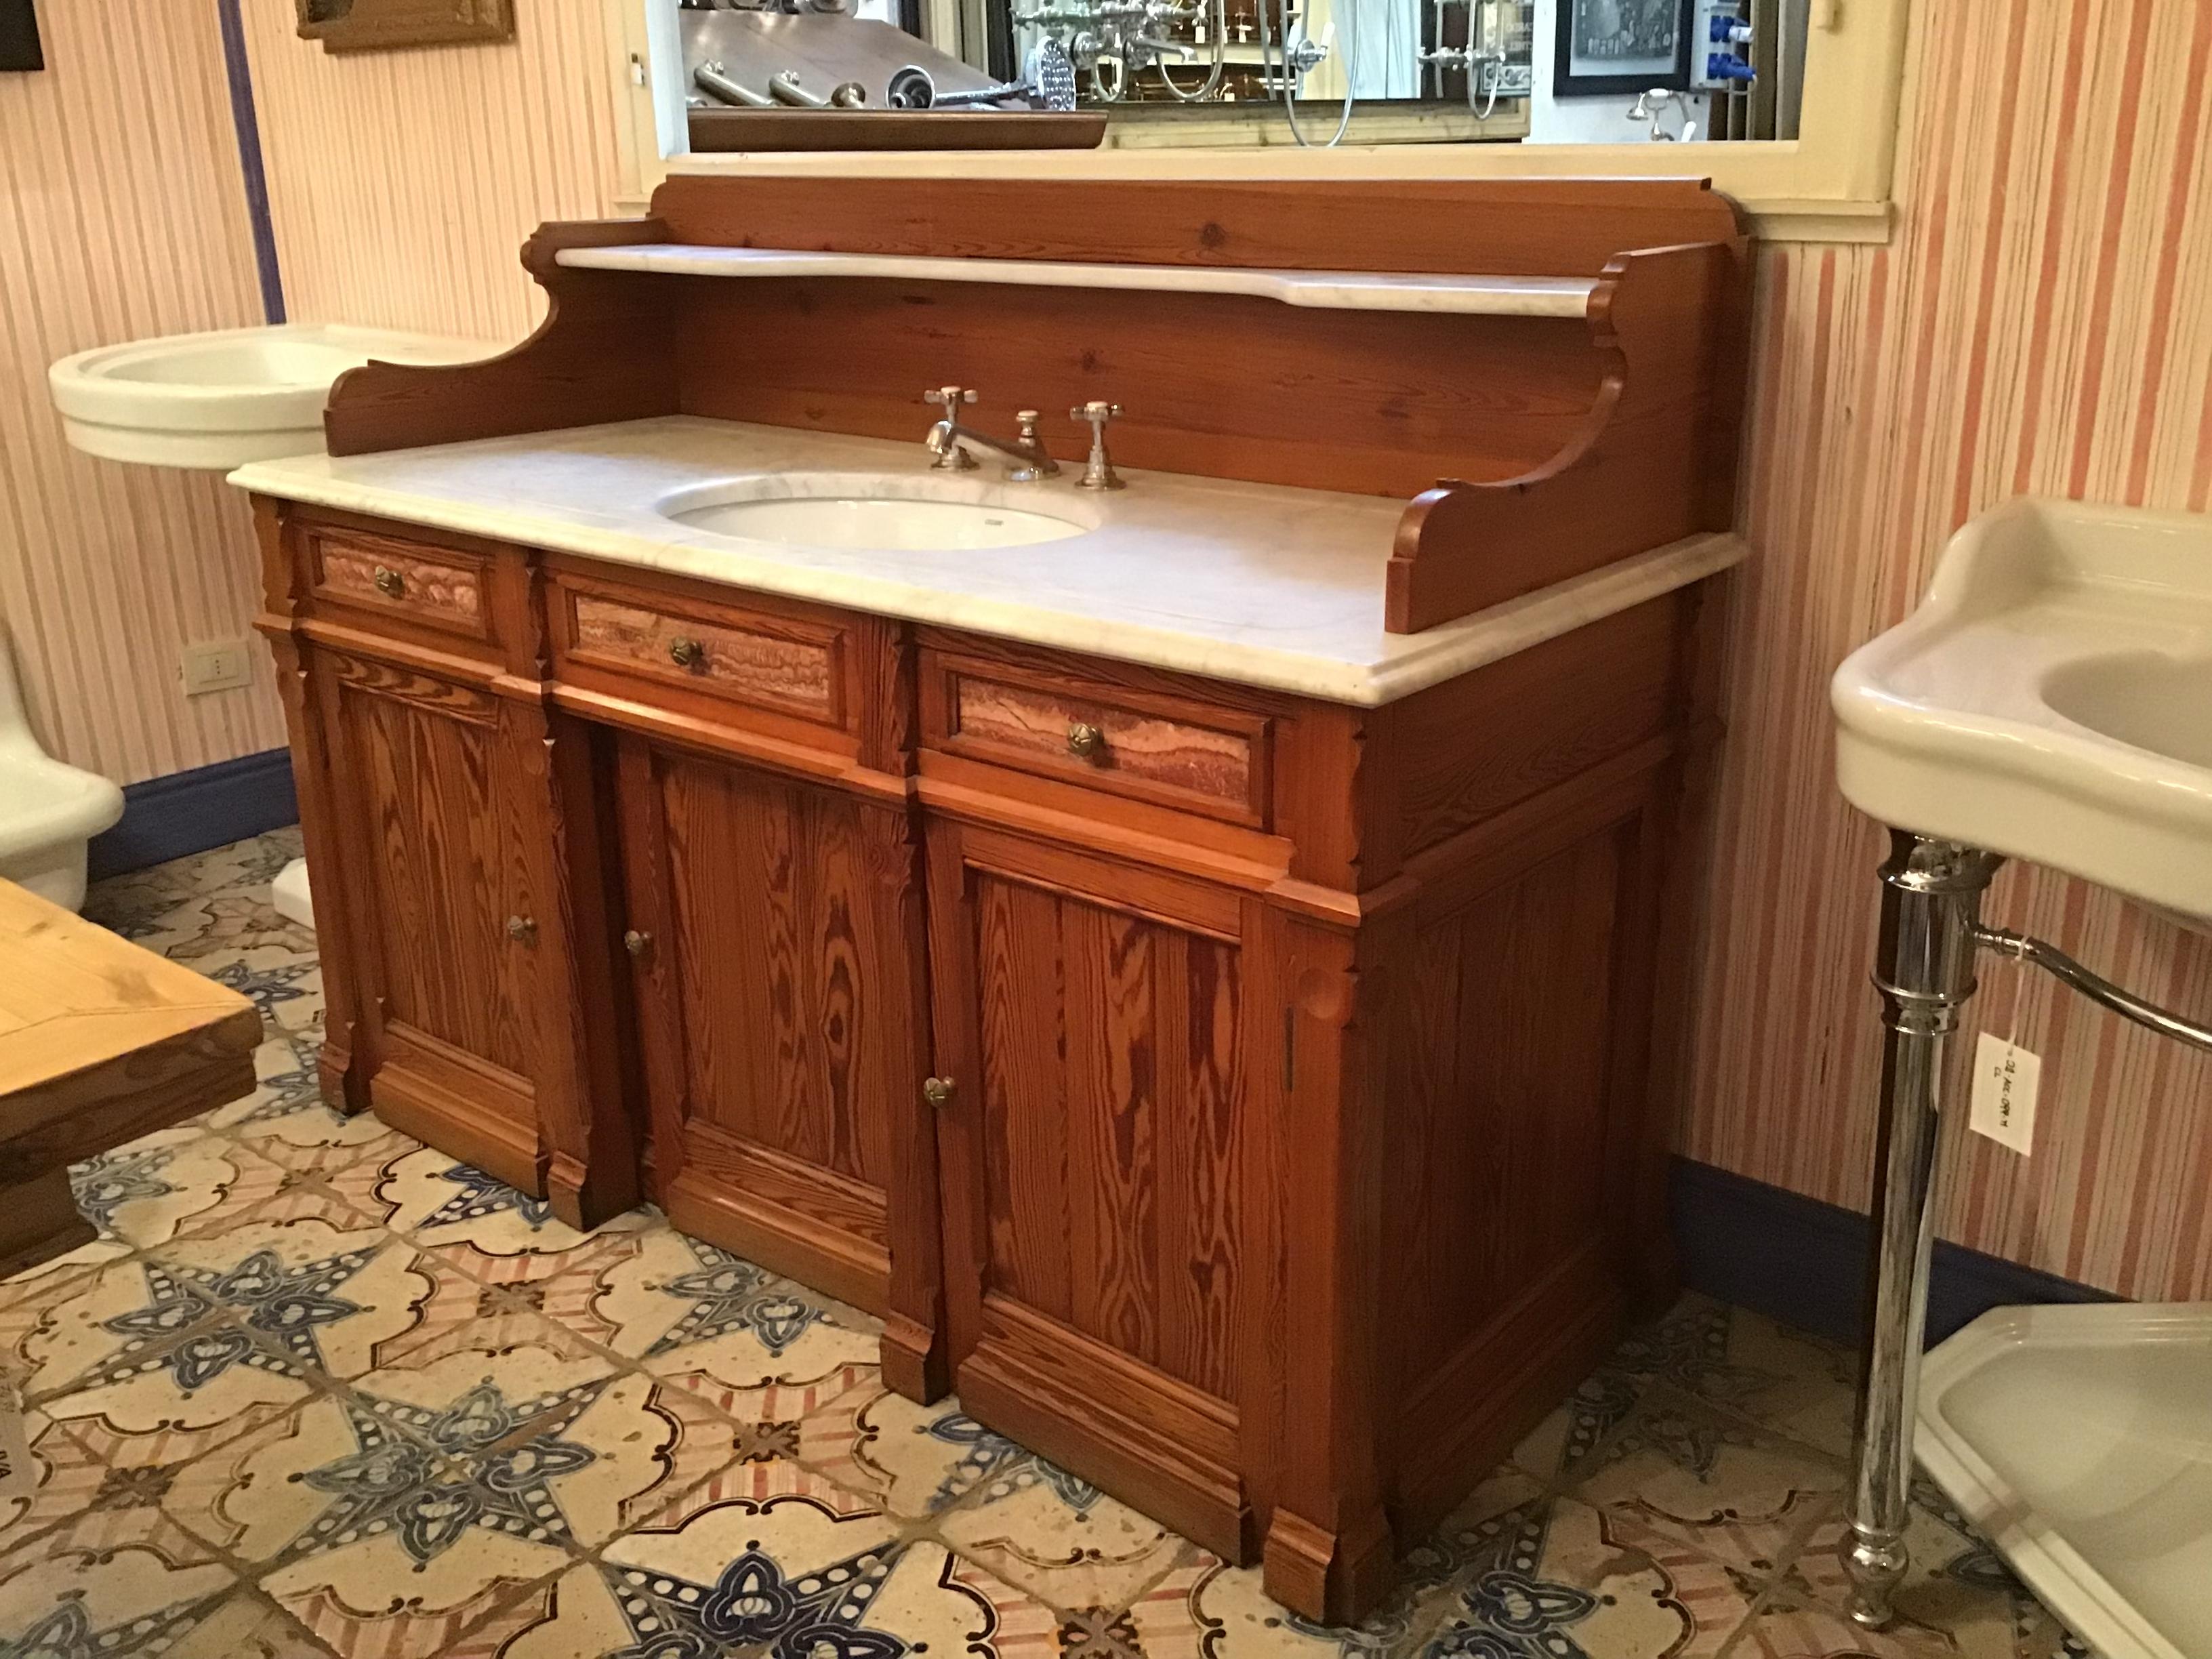 19th century French pitch pine cupboard sink with pink Persian marble inserts and Carrara marble top, 1890s.